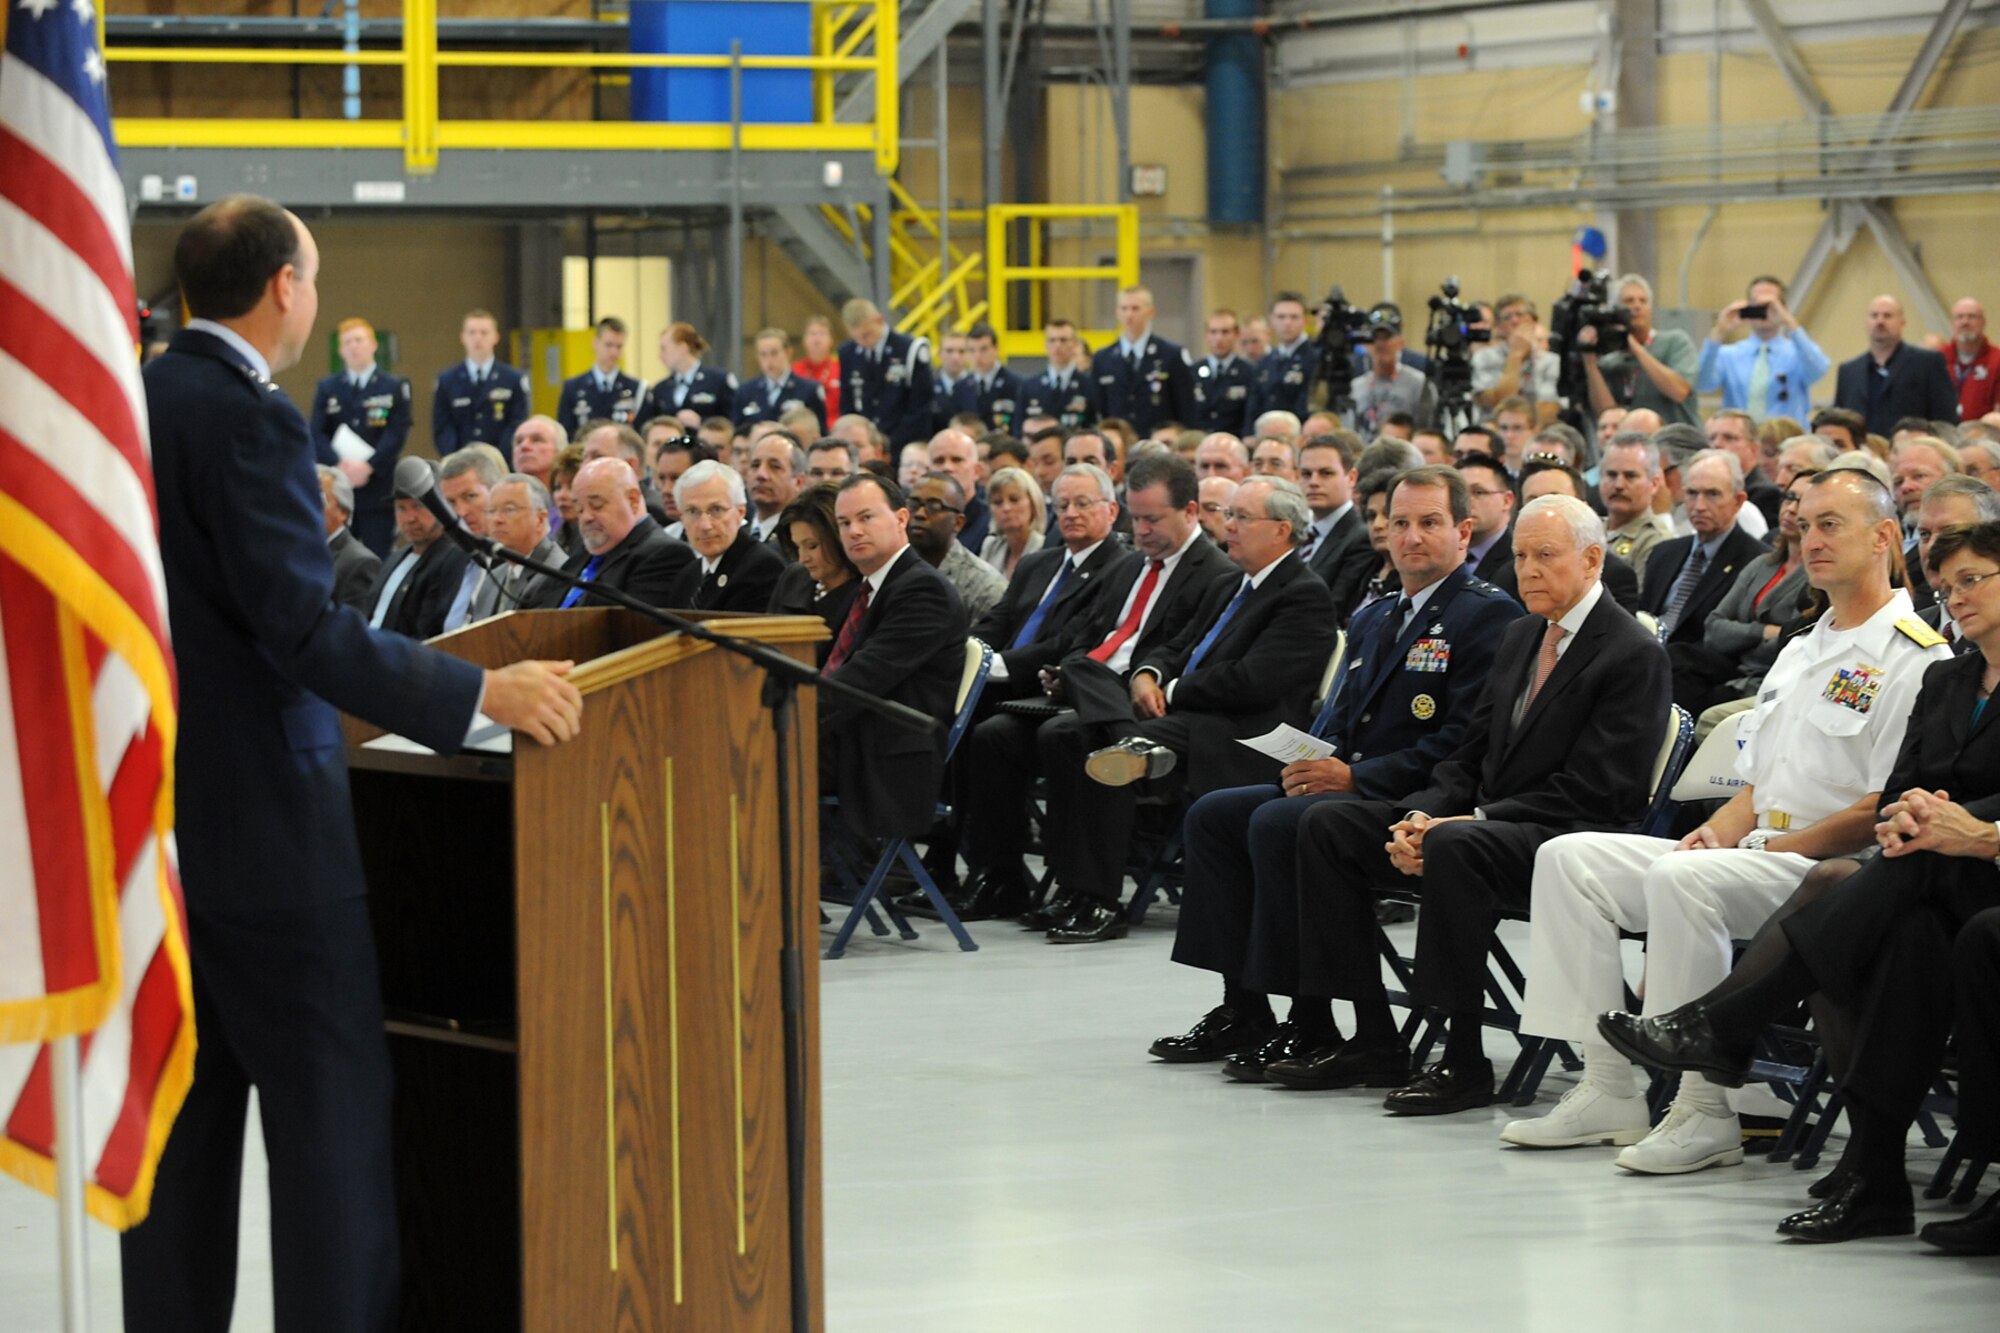 Lt. Gen. Bruce Litchfield, Air Force Sustainment Center commander, speaks during the F-35A Lightning II Joint Strike Fighter commemoration ceremony Sept. 20, 2013, at Hill Air Force Base, Utah. Hill, Lockheed Martin, Utah elected officials and community members gathered for a ceremony to commemorate the beginning of F-35 depot maintenance at the Ogden Air Logistics Complex. The F-35A is a multi-variant, multi-role, fifth generation fighter, and will undergo organic depot modification work at Hill AFB. (U.S. Air Force photo by Alex R. Lloyd/Released)